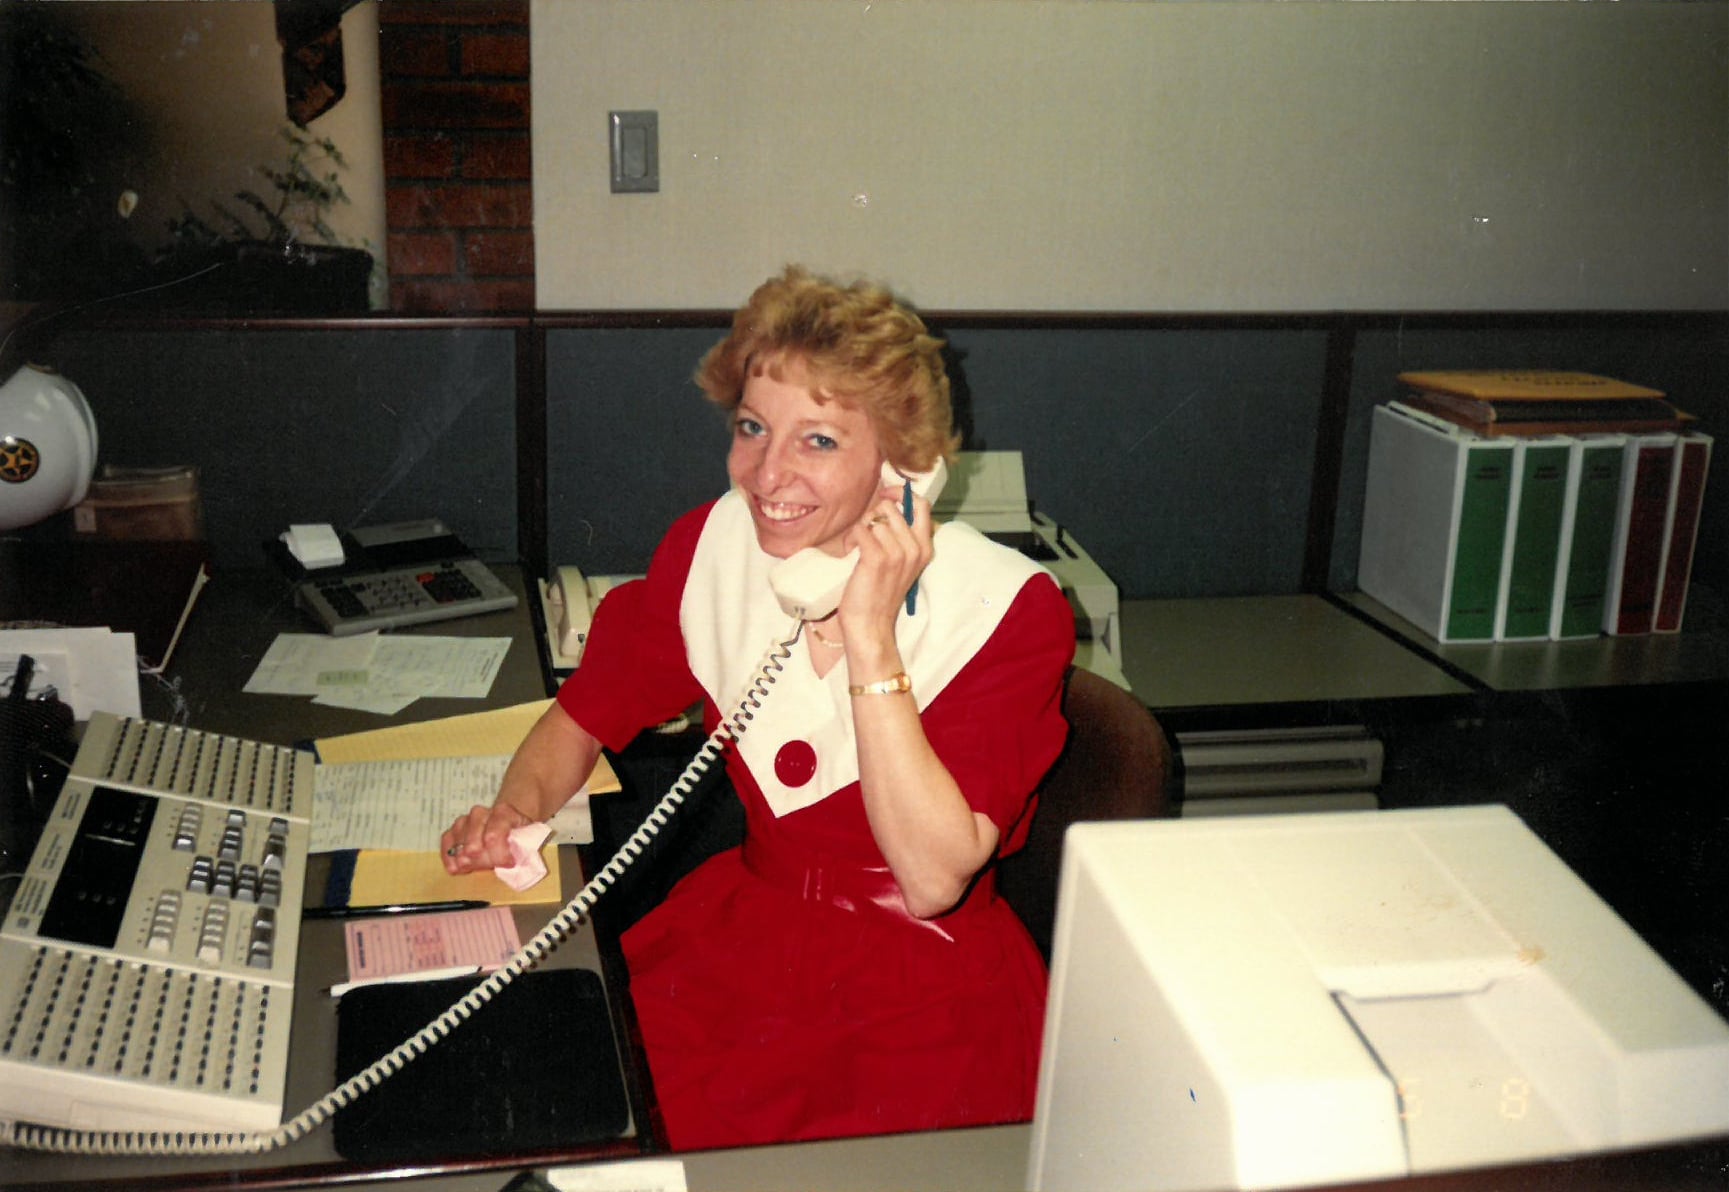 Women in red dress answering phone.